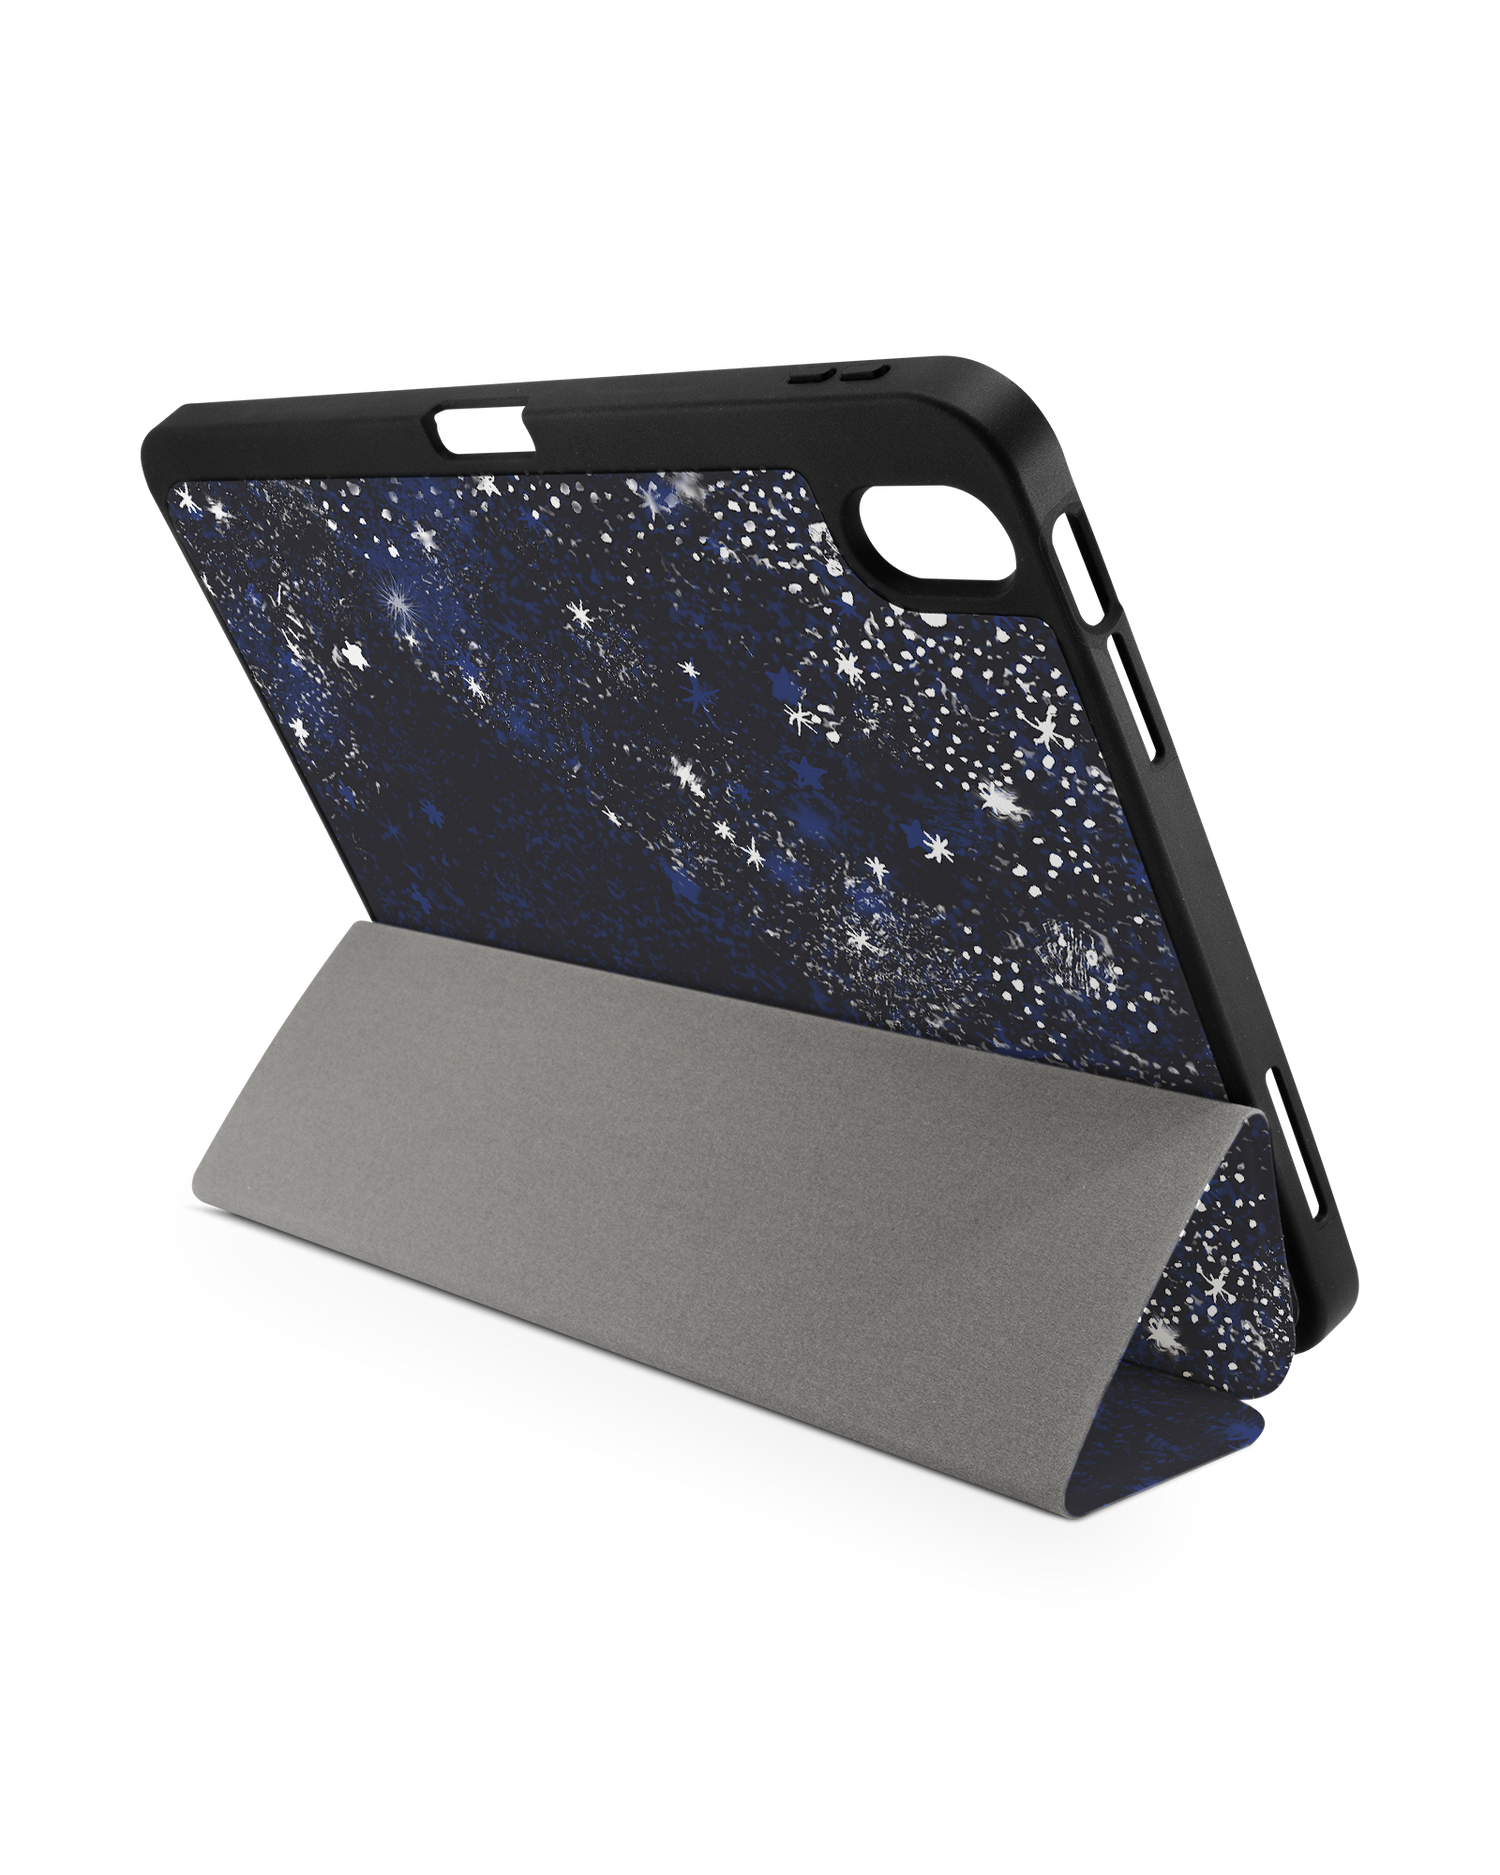 Starry Night Sky iPad Case with Pencil Holder for Apple iPad (10th Generation): Set up in landscape format (back view)